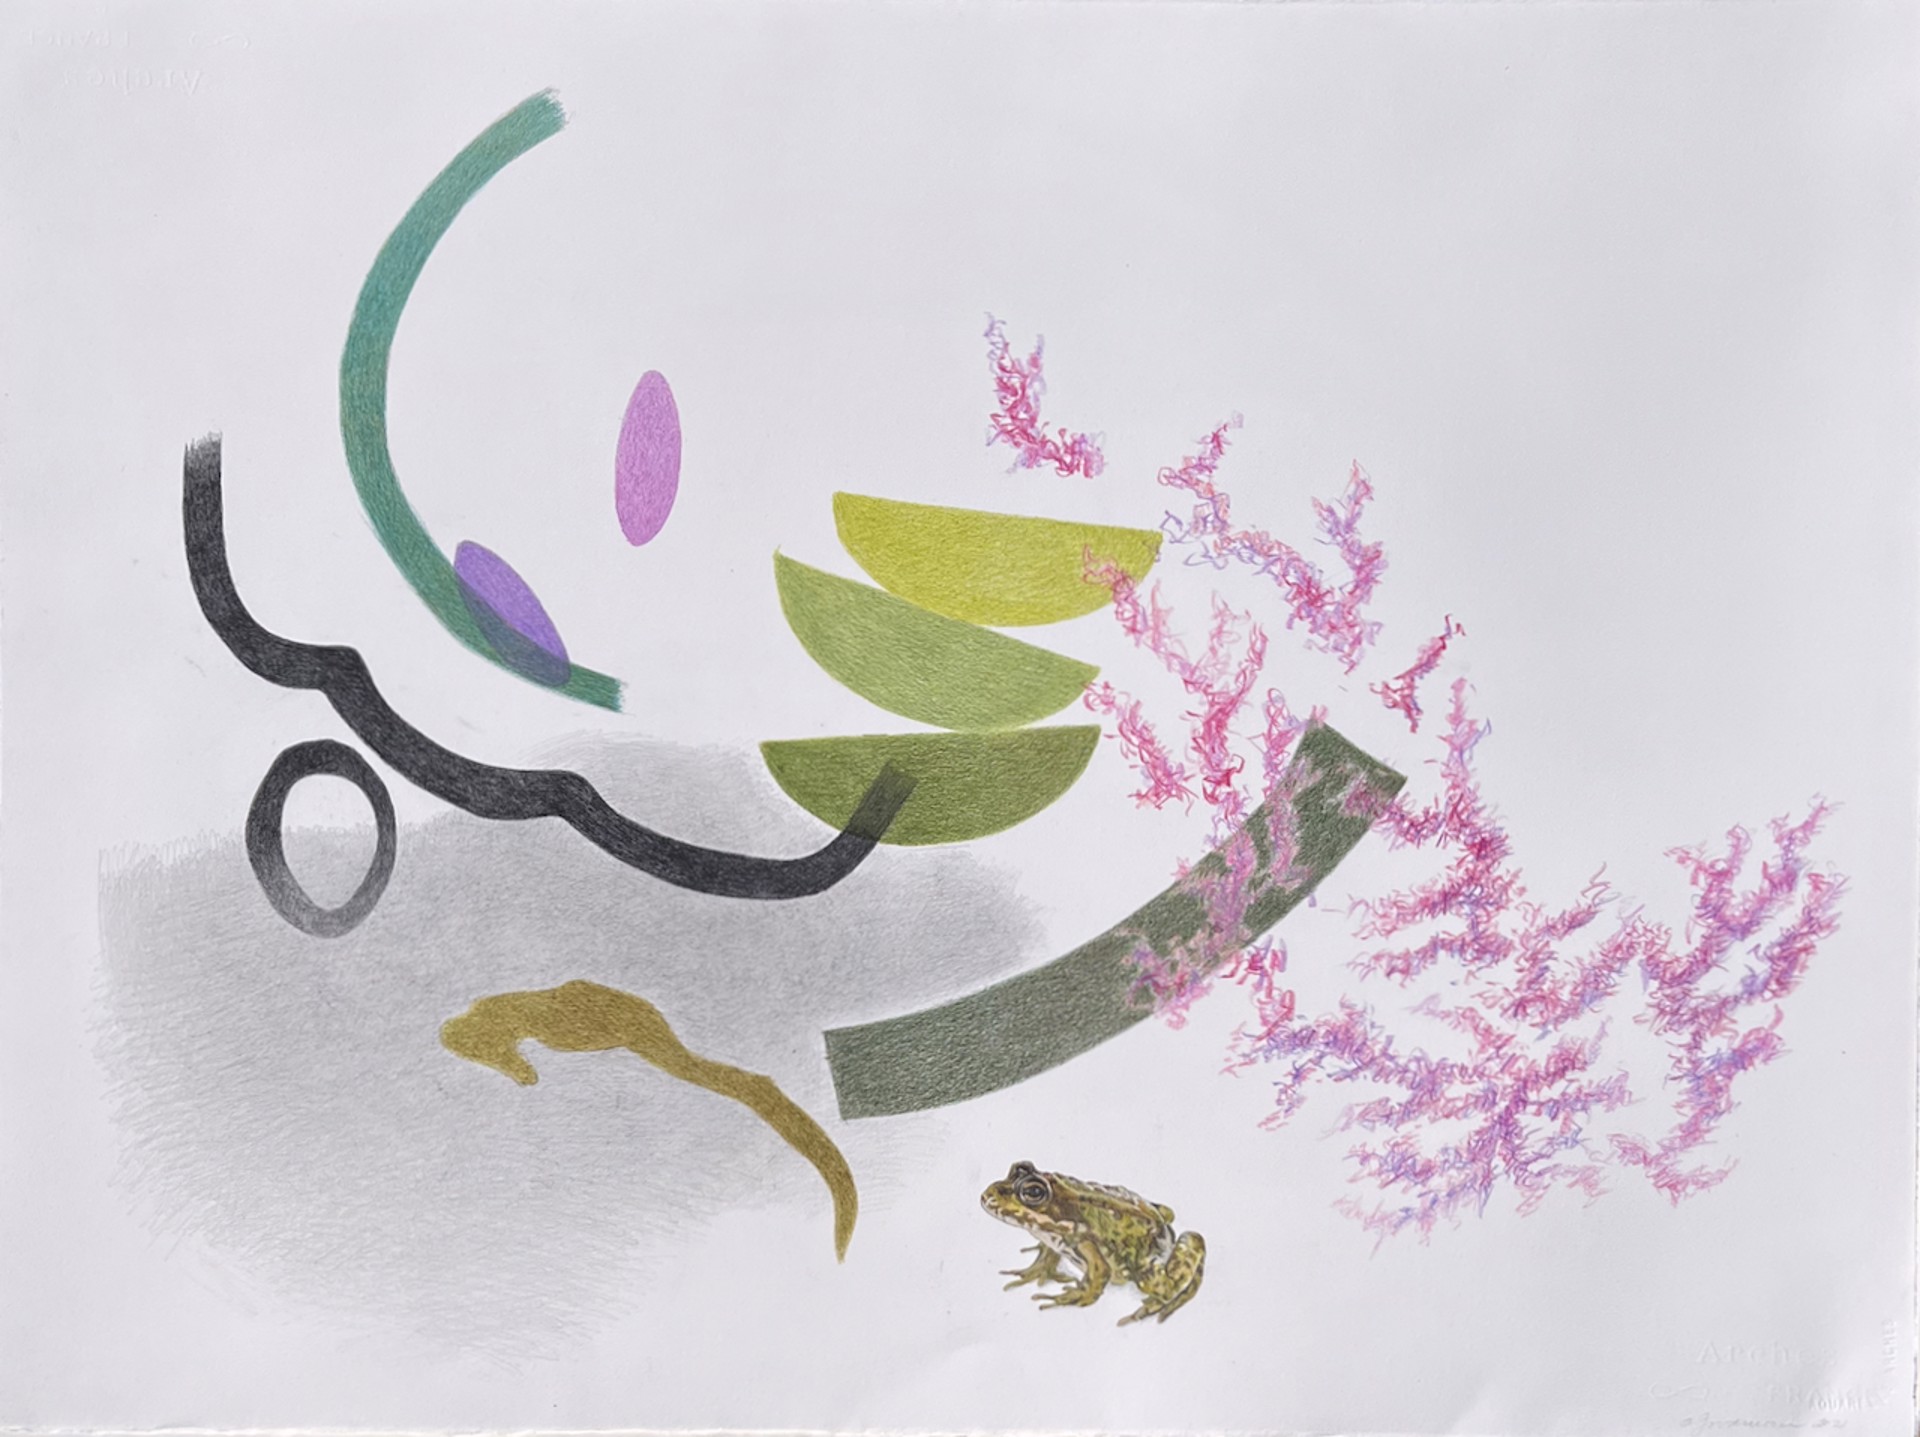 Woodland Frog and Redbuds by Janis Goodman